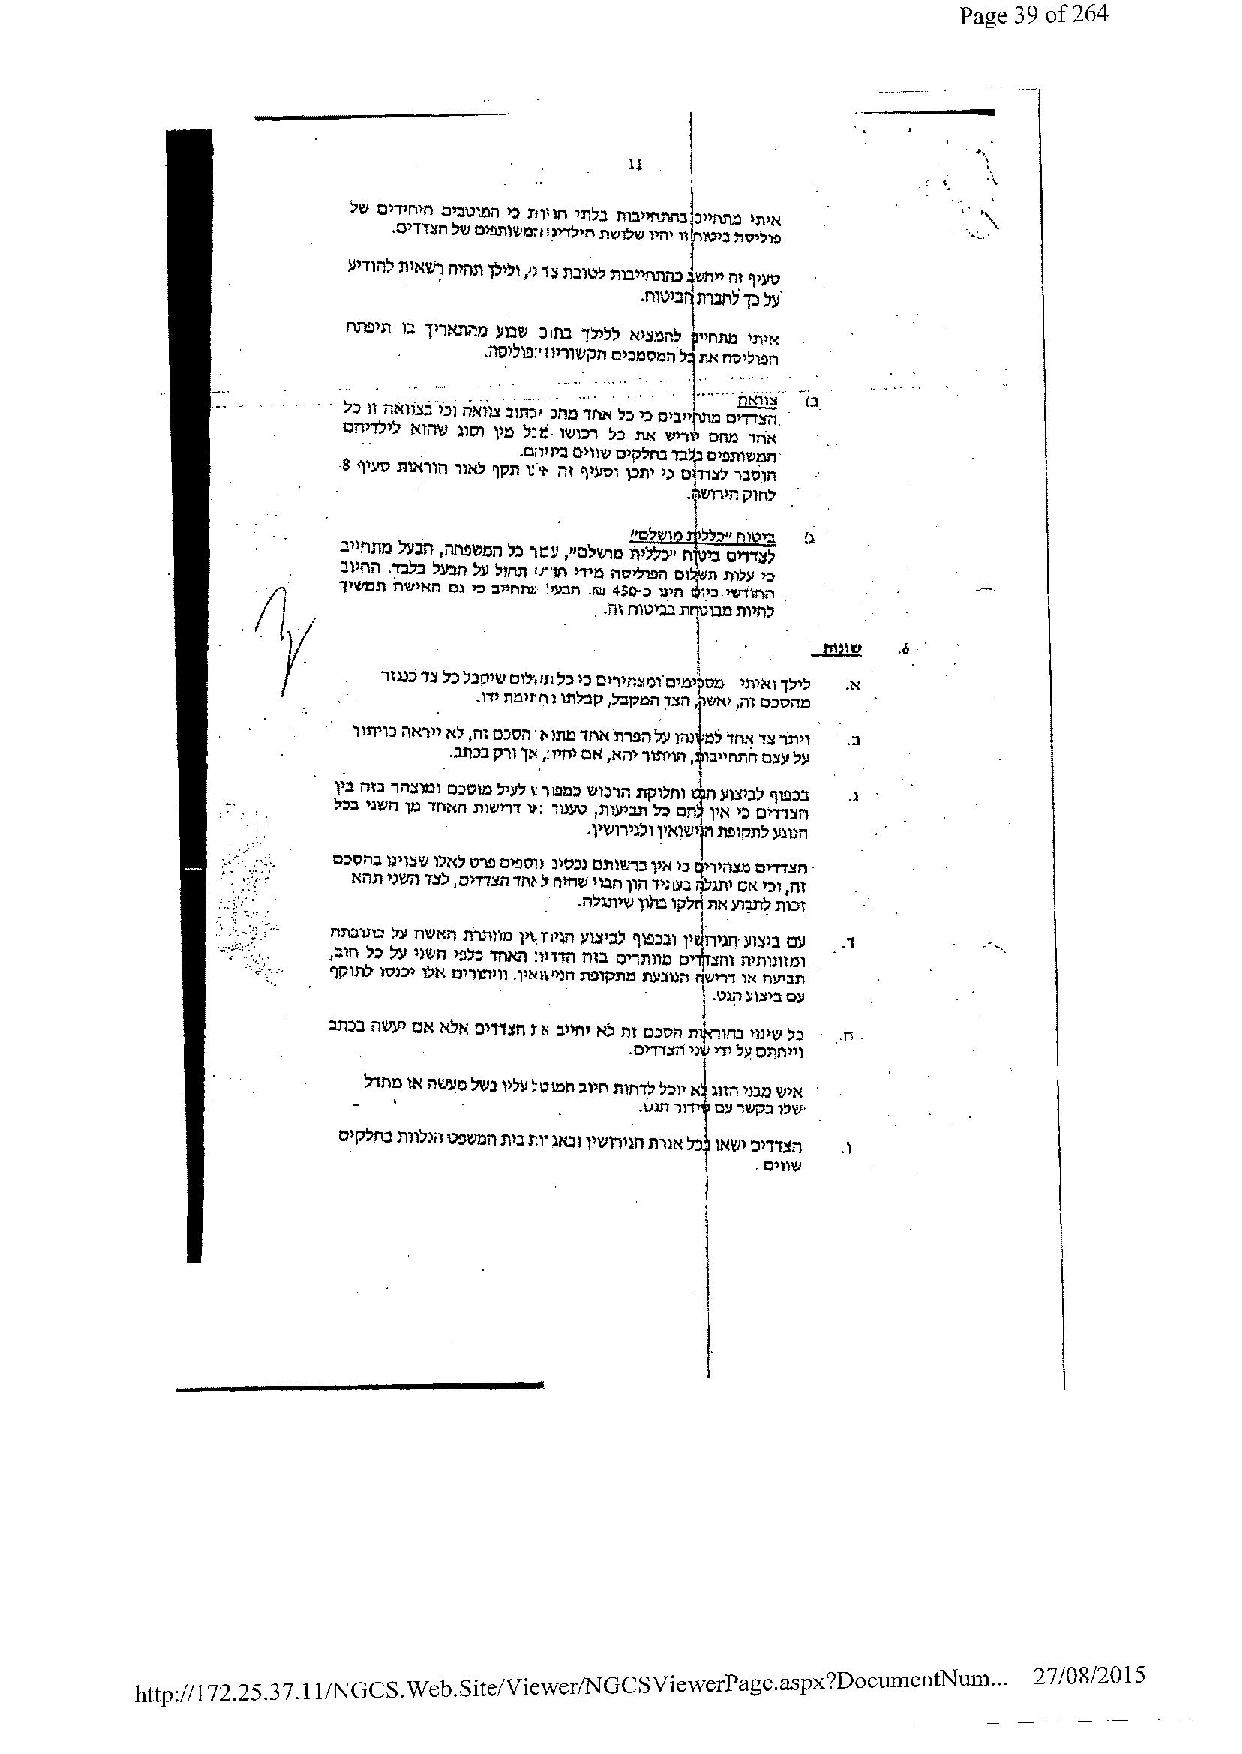 document-page-039